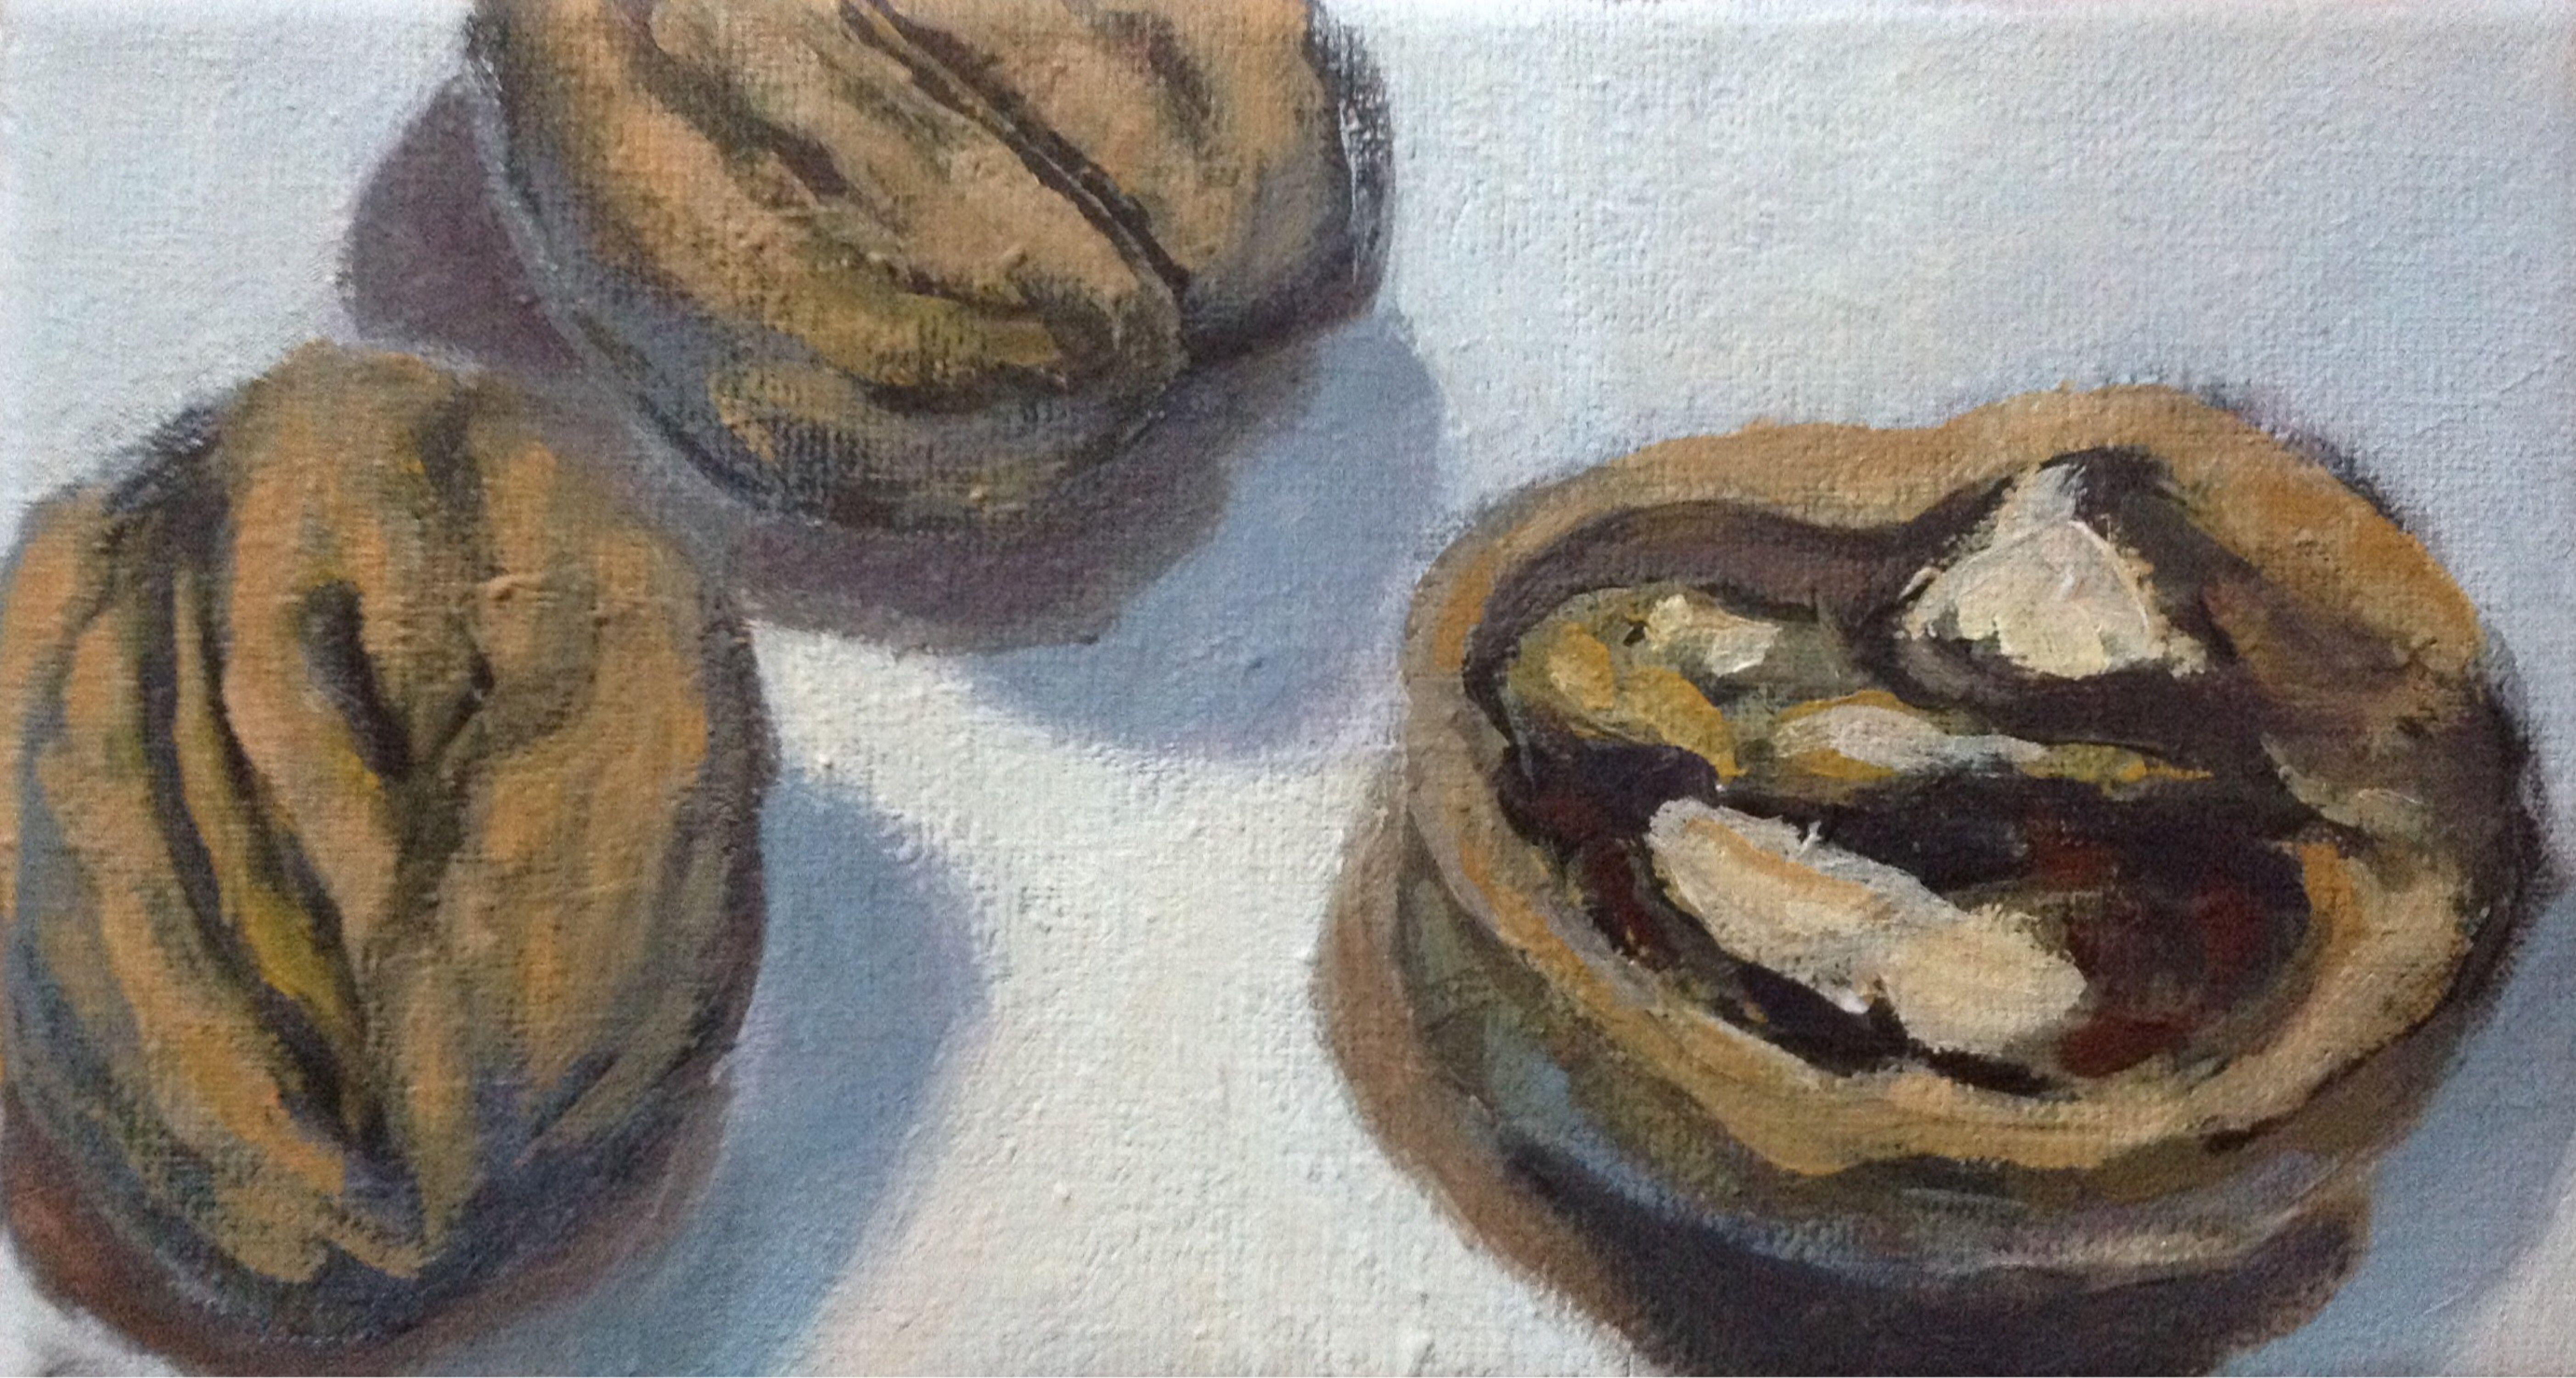 Acrylic on canvas. Very small format. I enjoy  making compositions for my paintings  of things I find around the house. In this case while cracking nuts I decided to use it as my subject. :: Painting :: Contemporary :: This piece comes with an